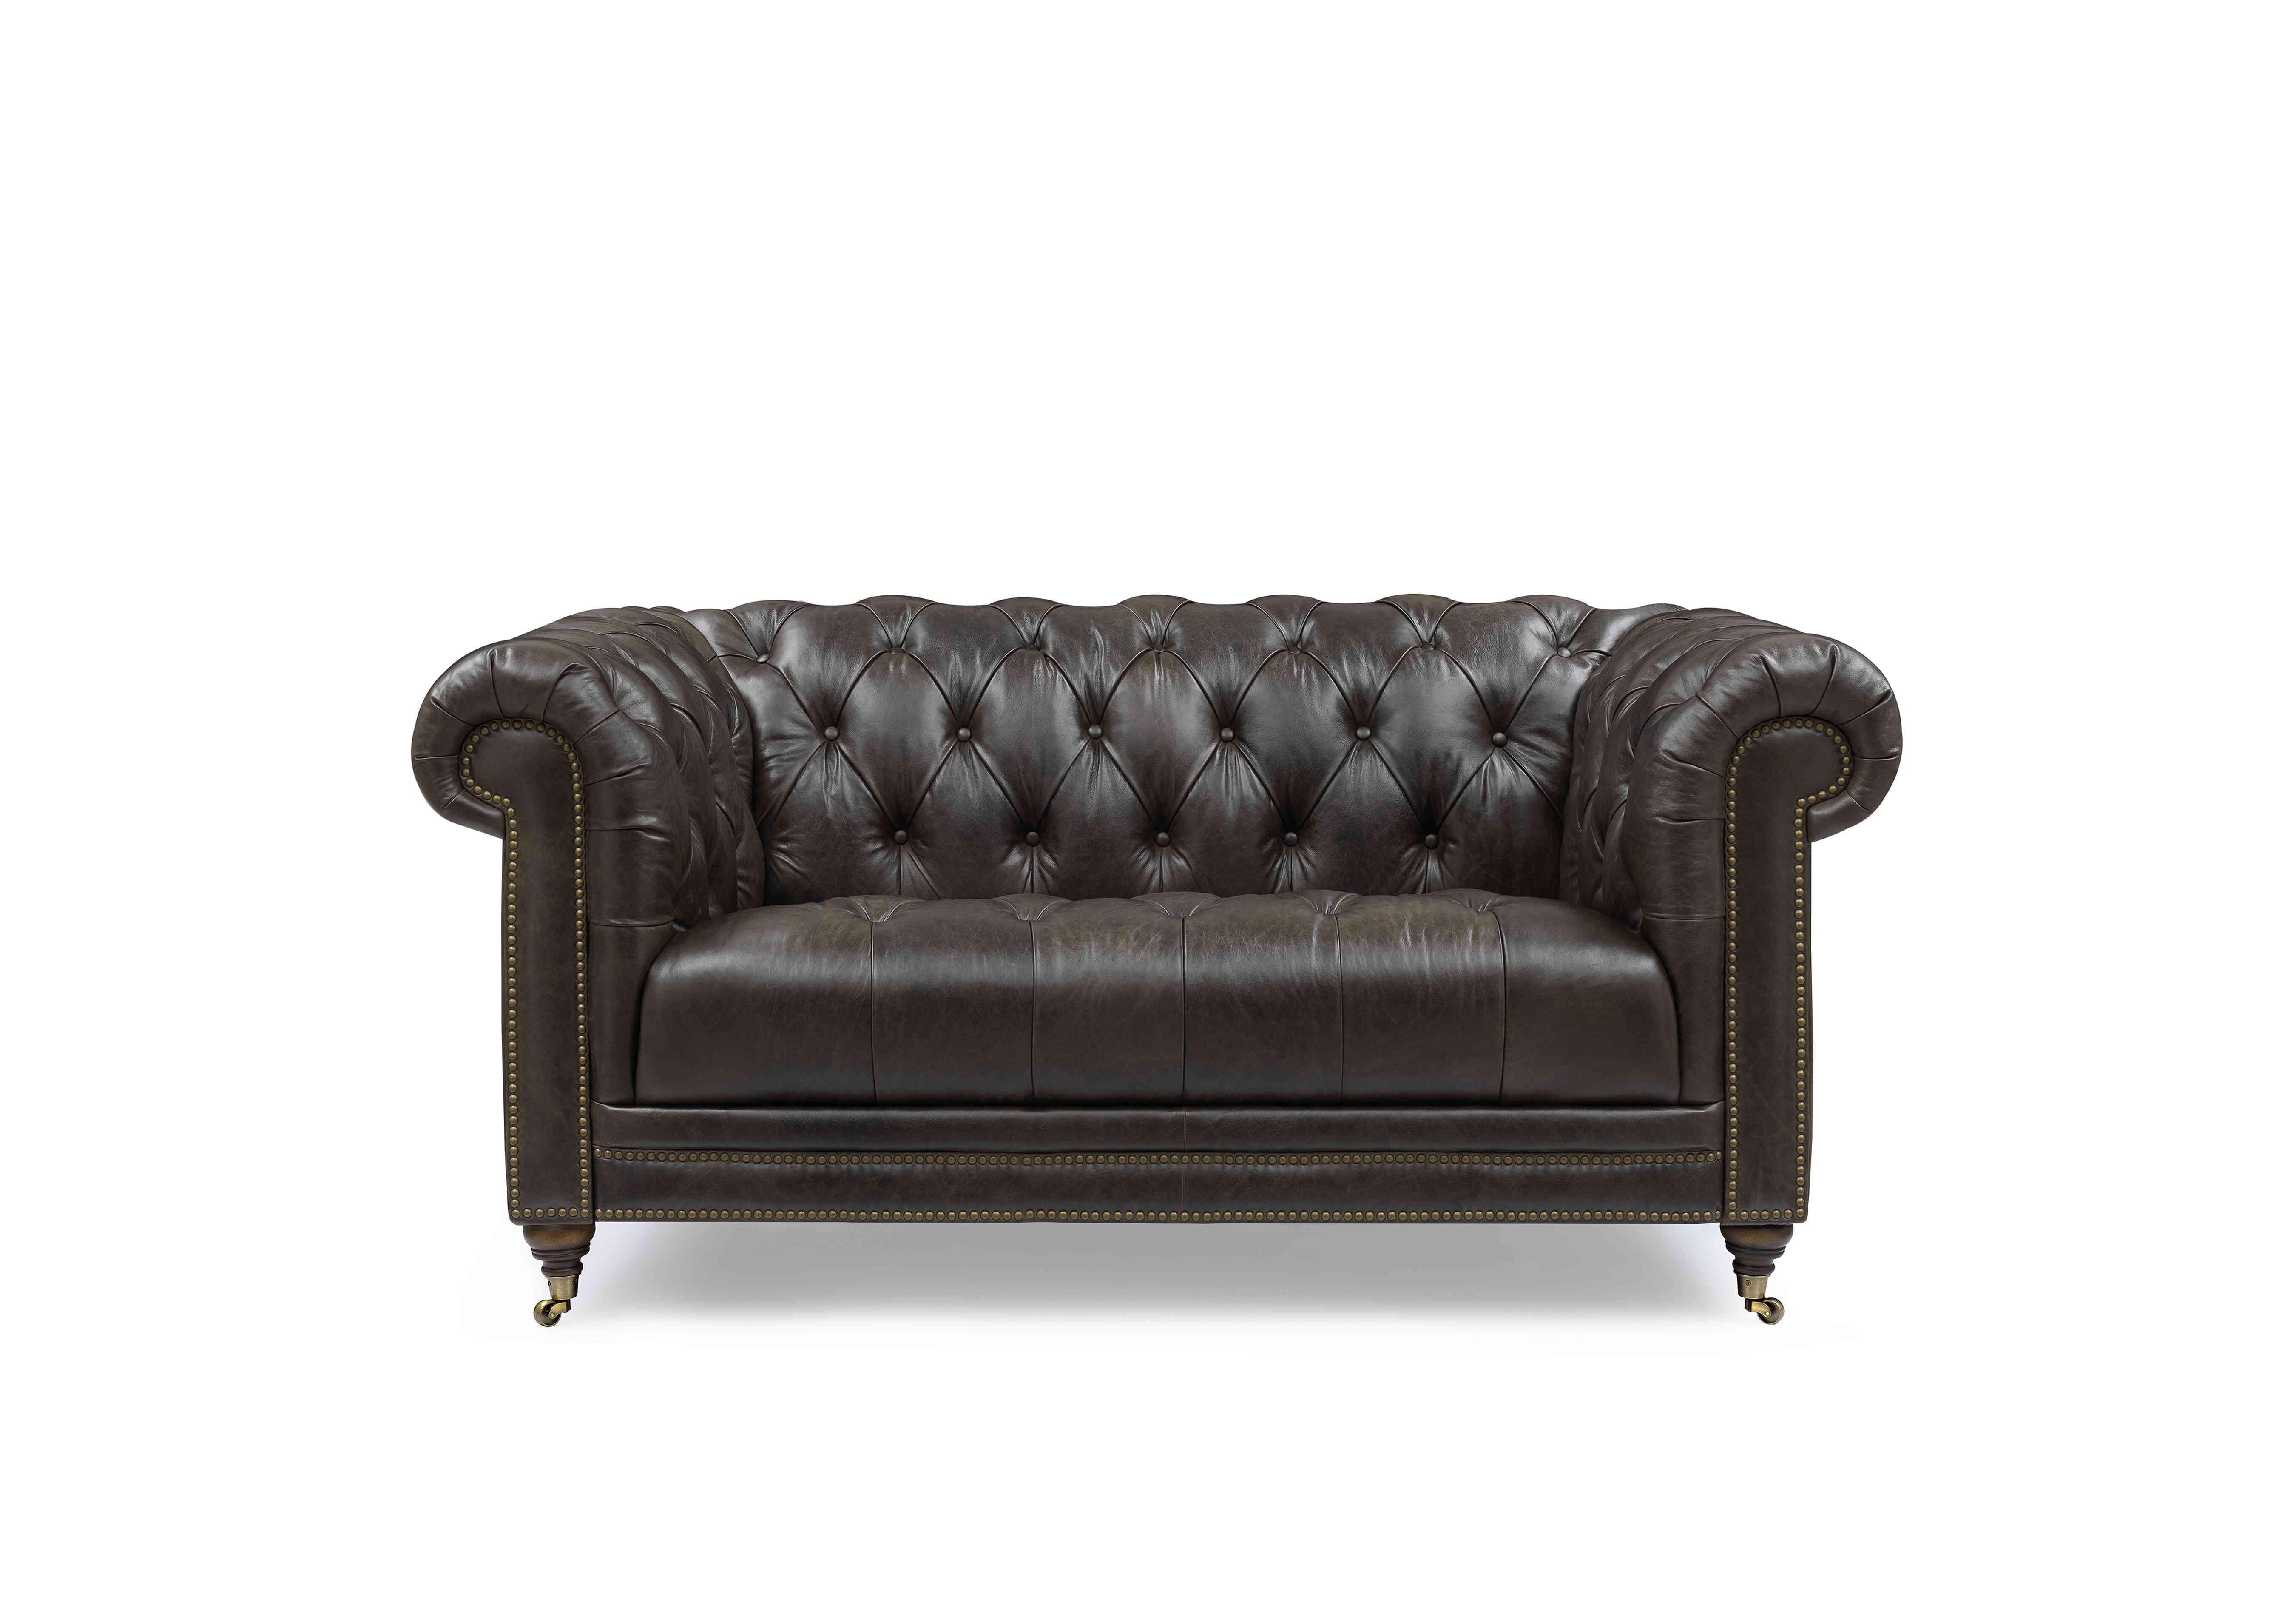 Walter 2 Seater Leather Chesterfield Sofa with USB-C in X3y1-1759ls Cannon on Furniture Village